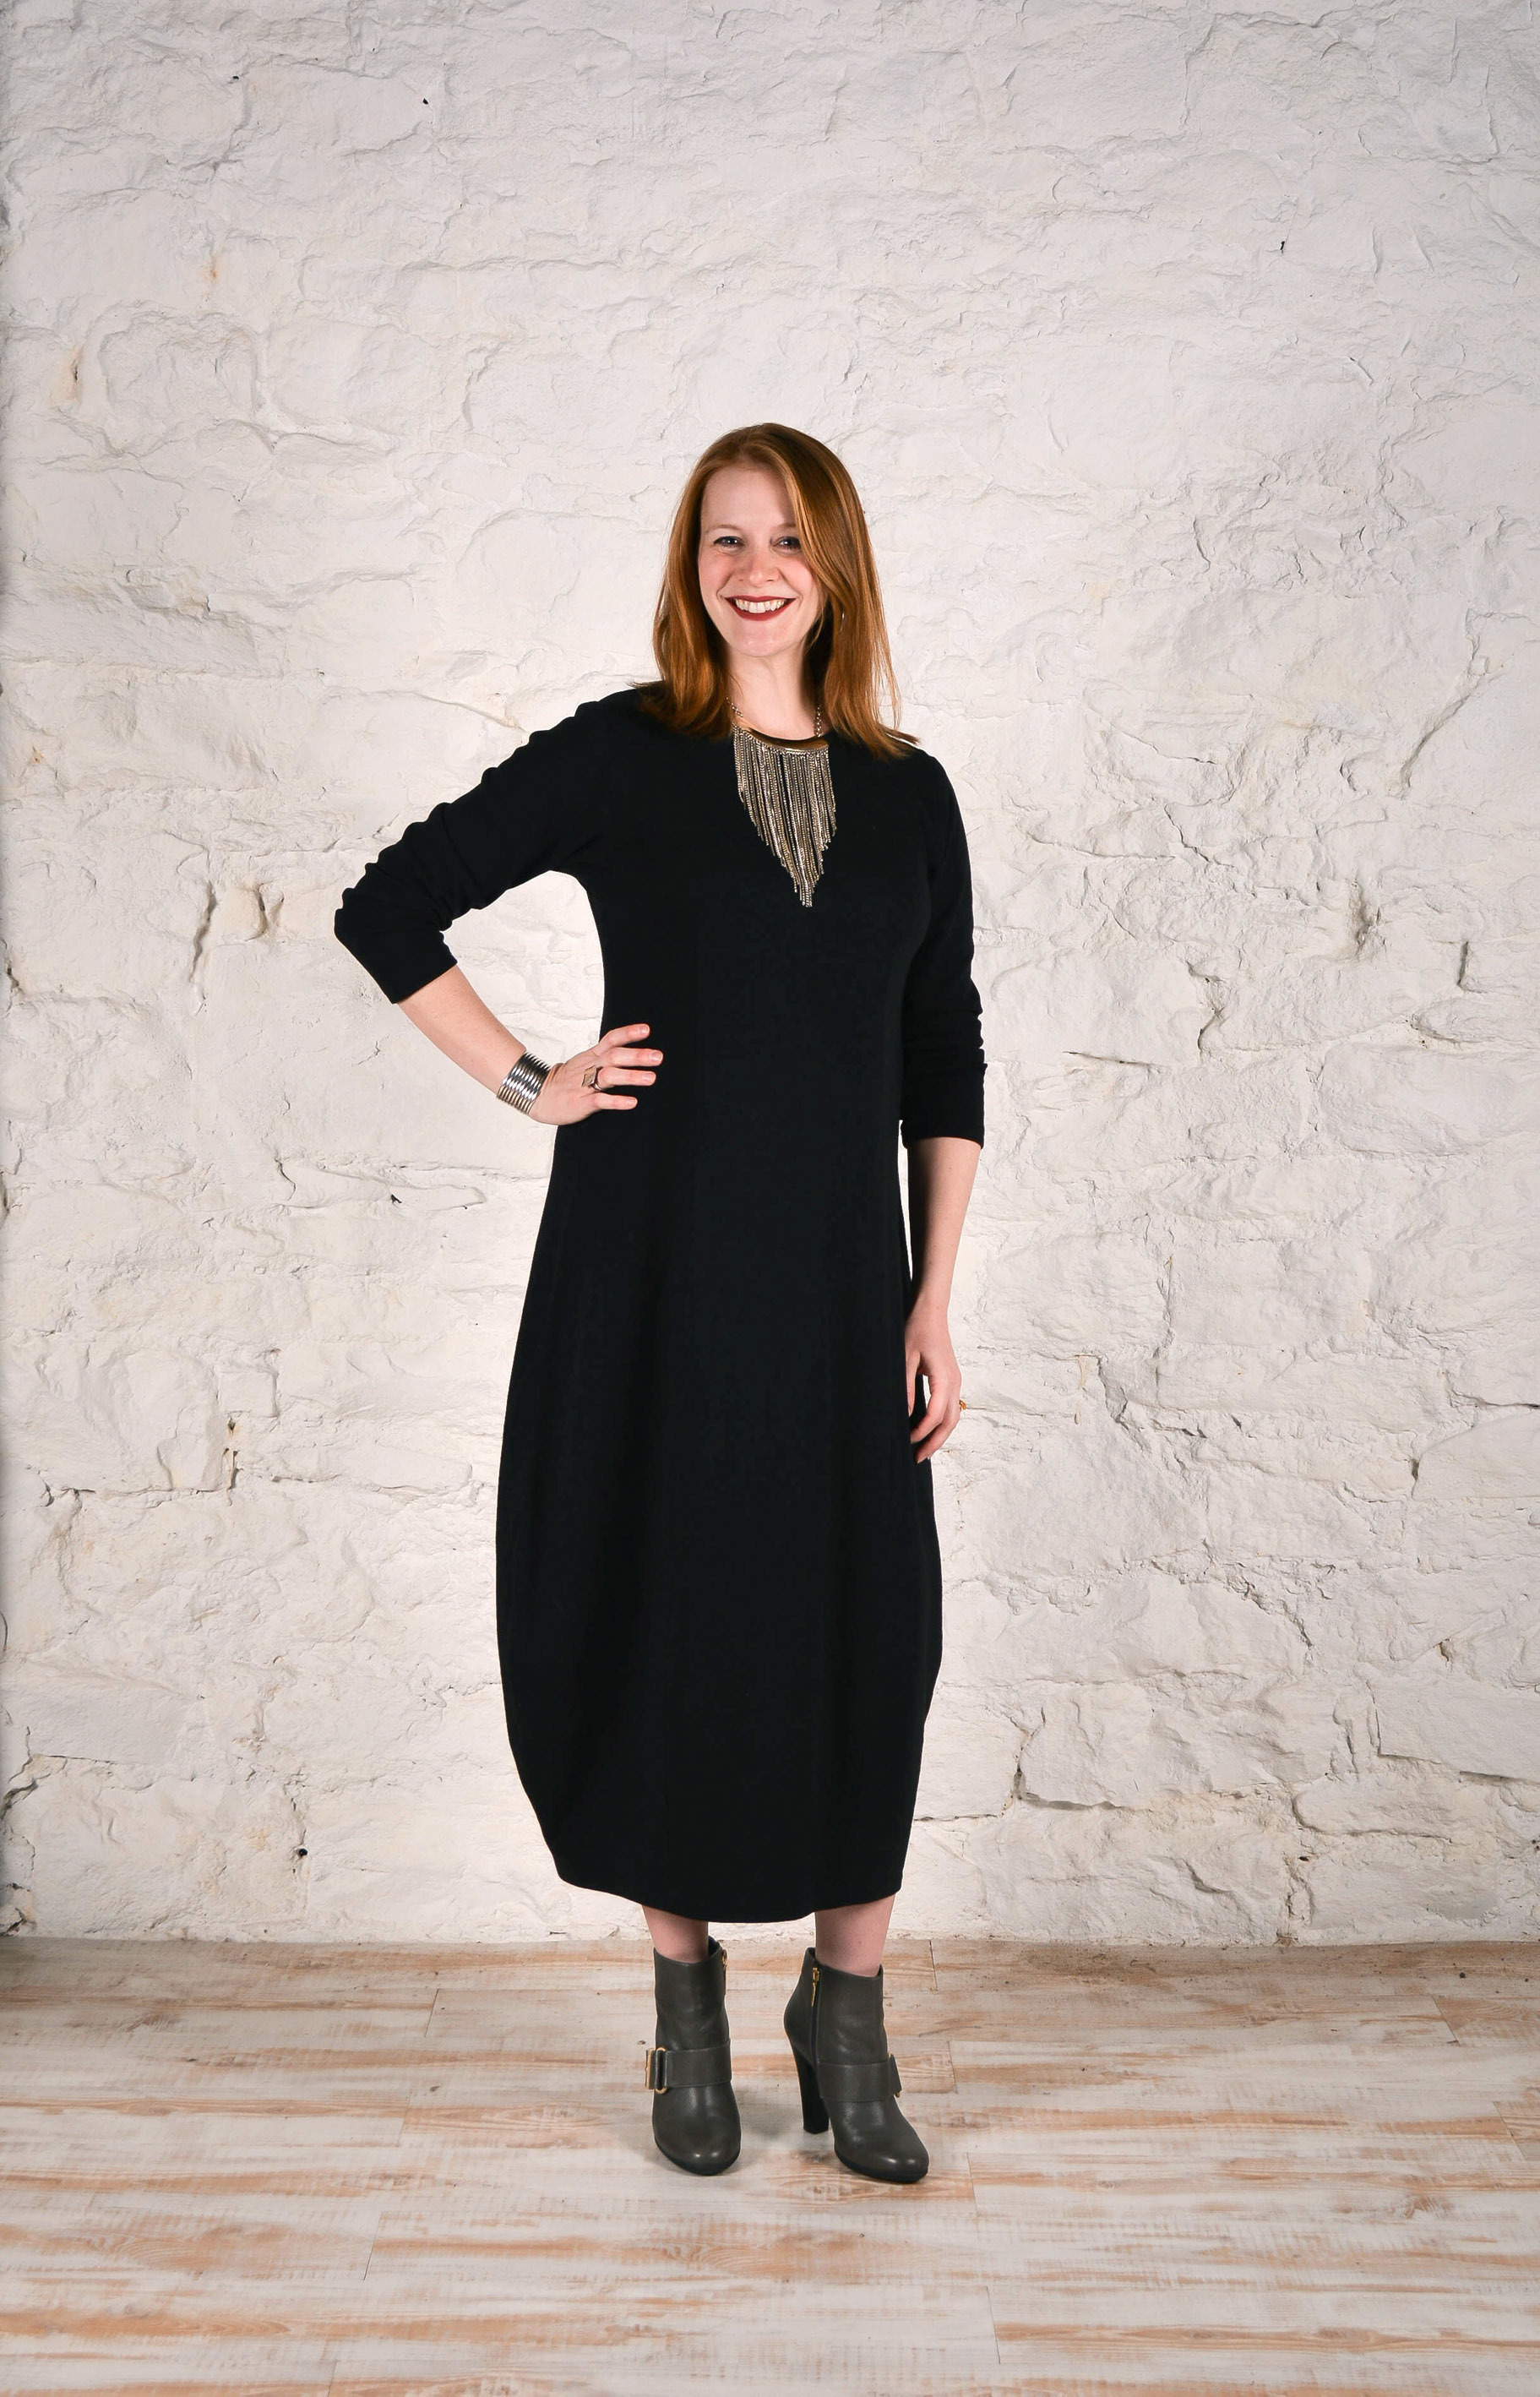 Cityscapes dress made in a black knit fabric